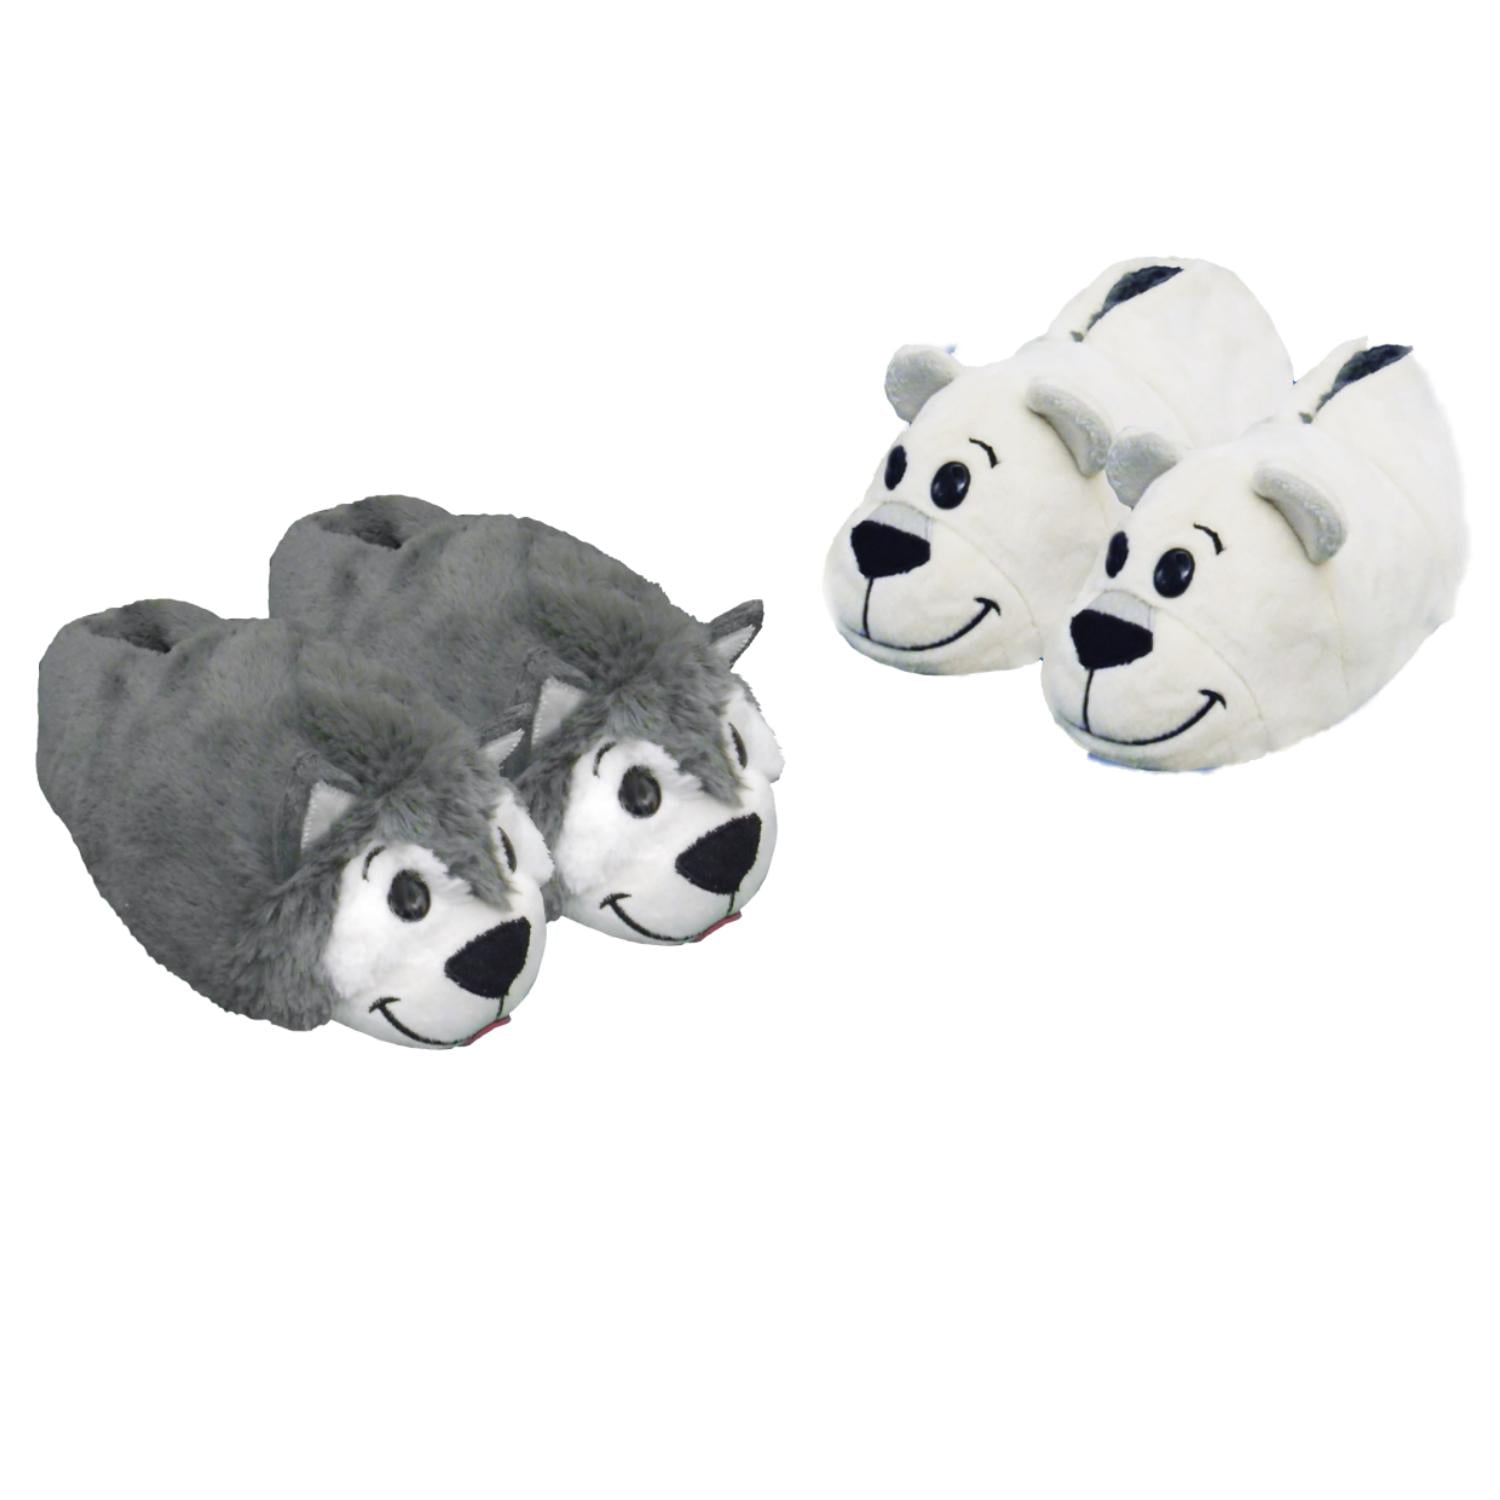 Share more than 250 childrens animal slippers latest